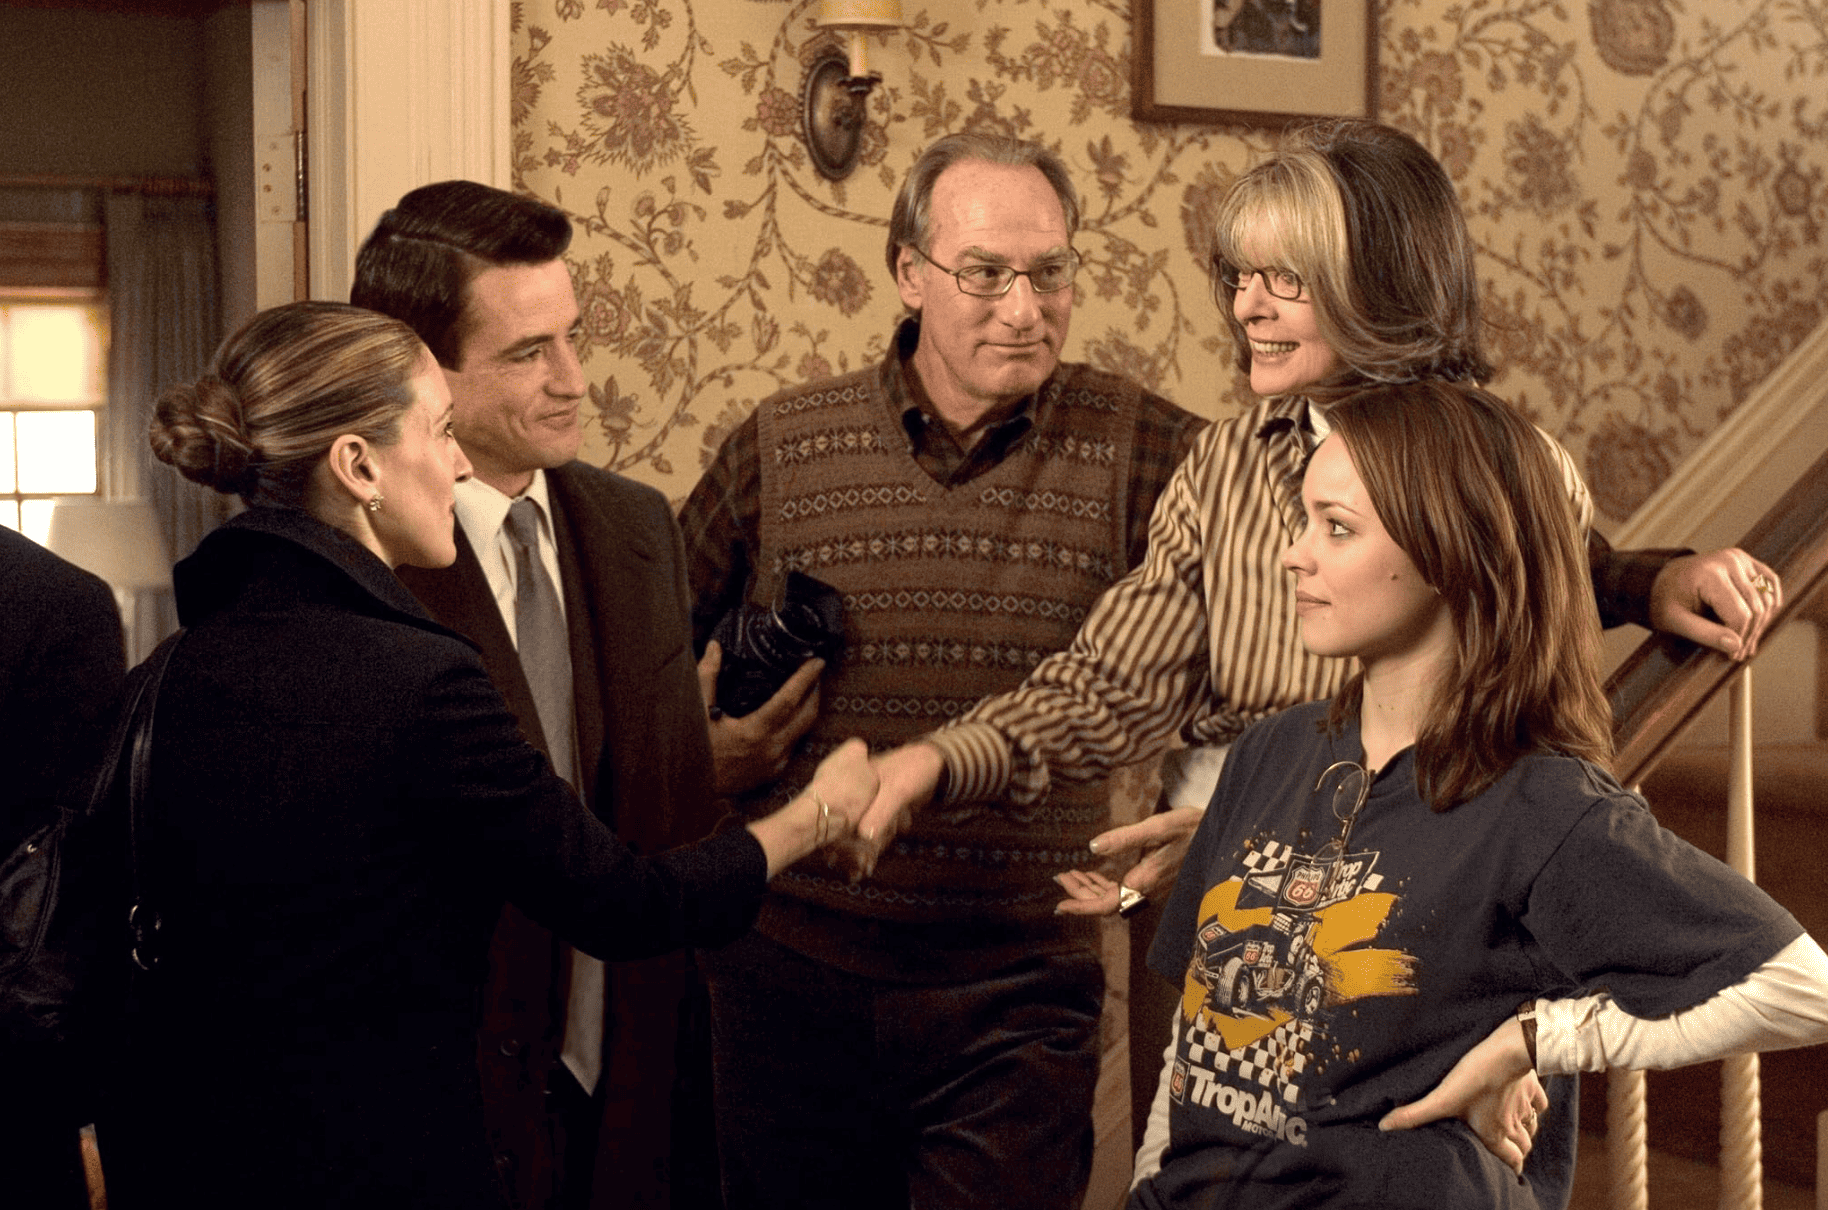 A woman meets her fiance’s family for the first time in this image from Michael London Productions.